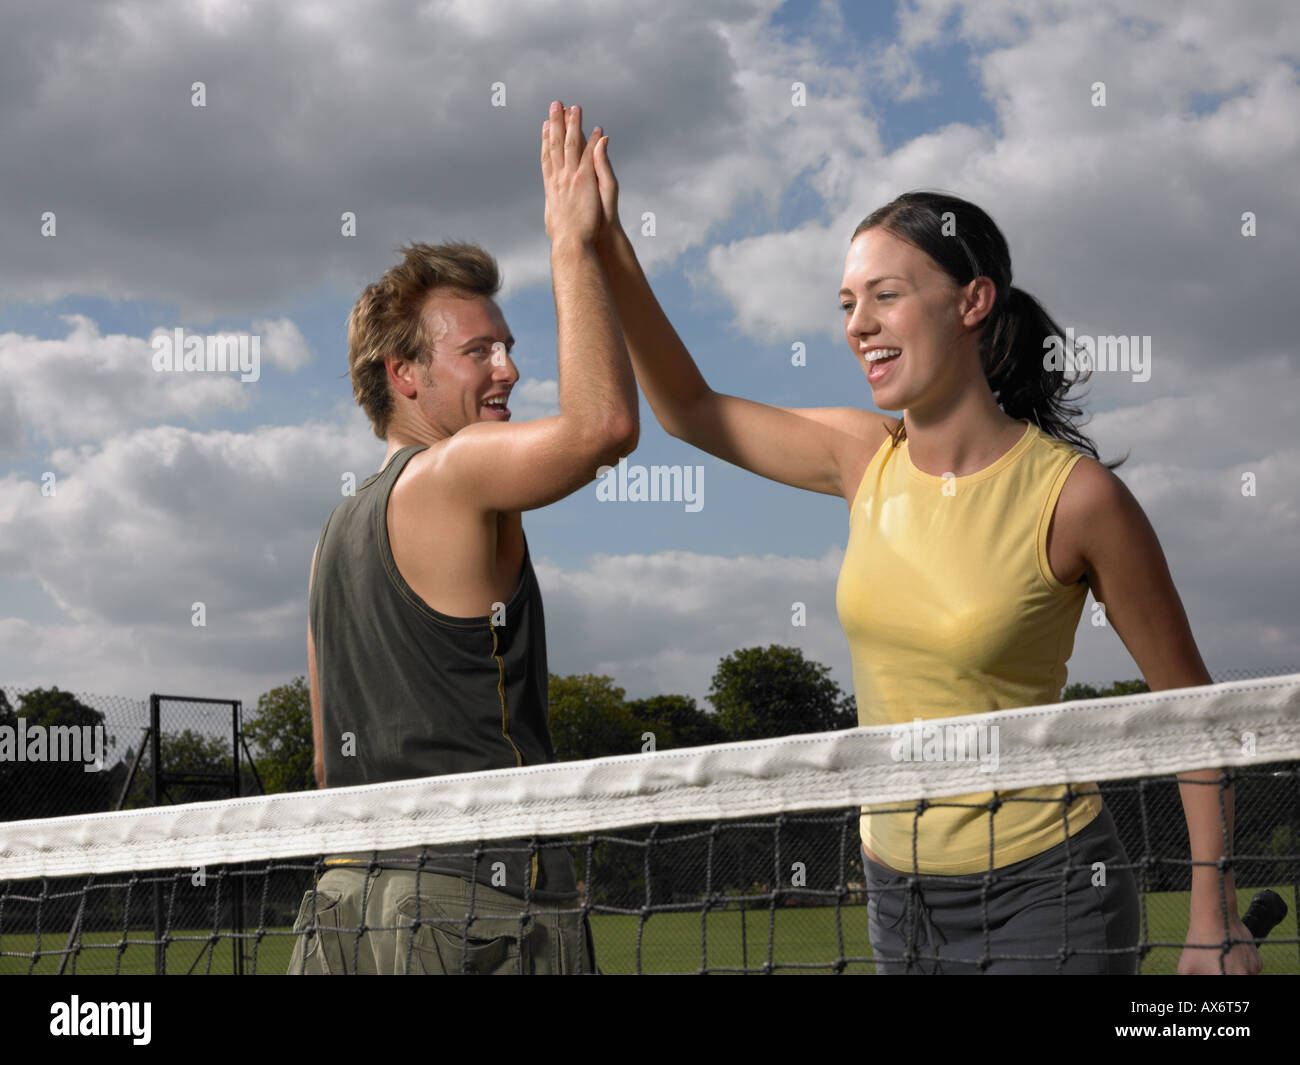 Tennis players doing a high five Stock Photo